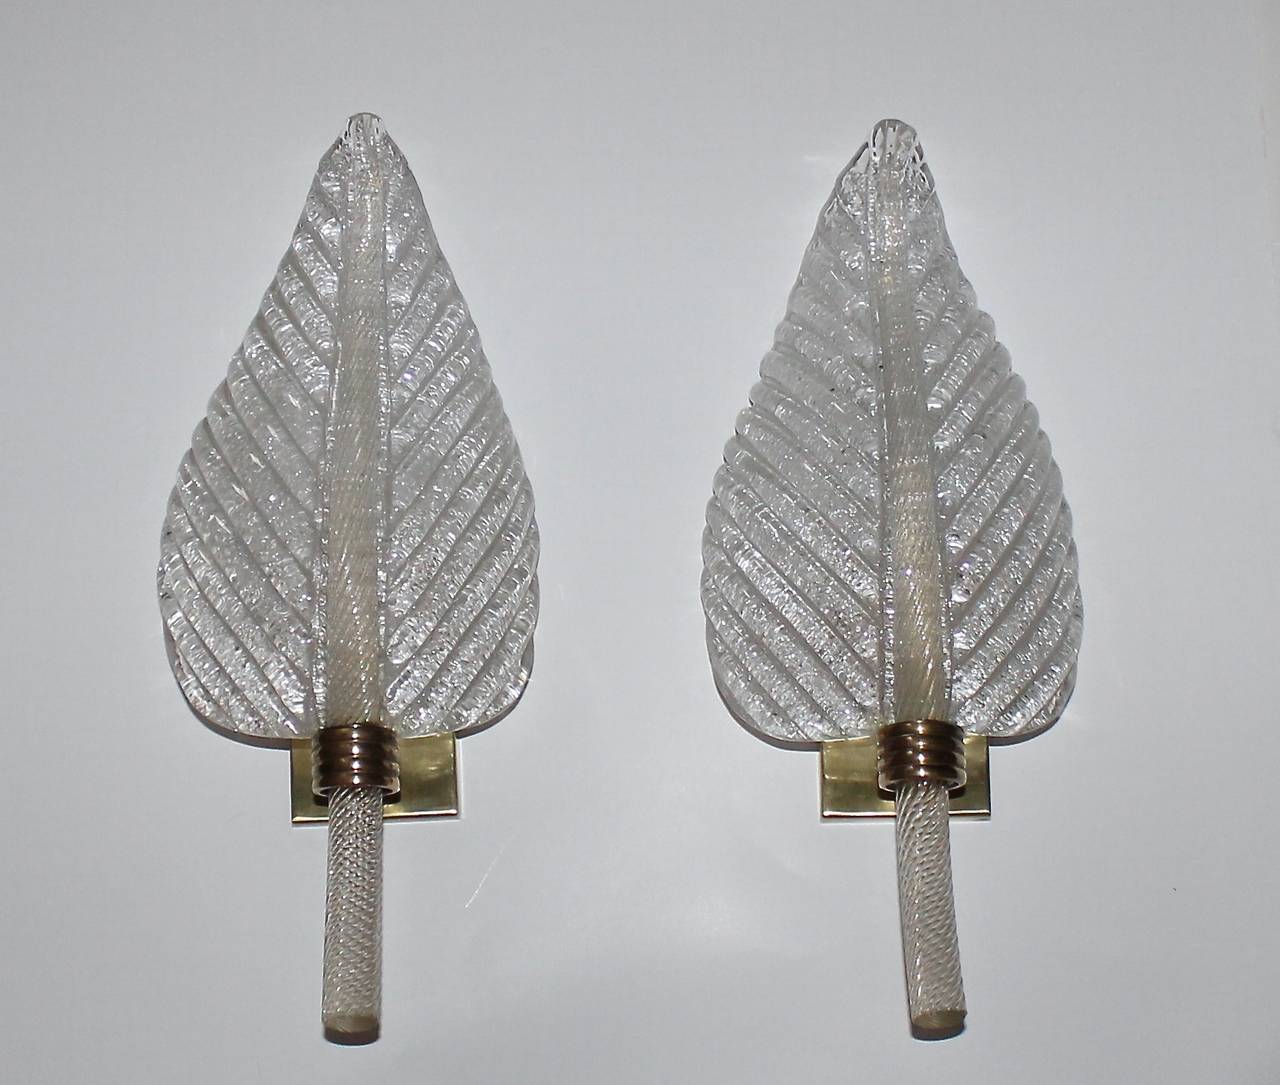 Beautiful pair of Murano glass wall sconces in leaf shape form, manufactured by Barovier & Toso in the early 1950s. Finely twisted glass stem infused with gold flecks and the reverse side of the leaf in the 